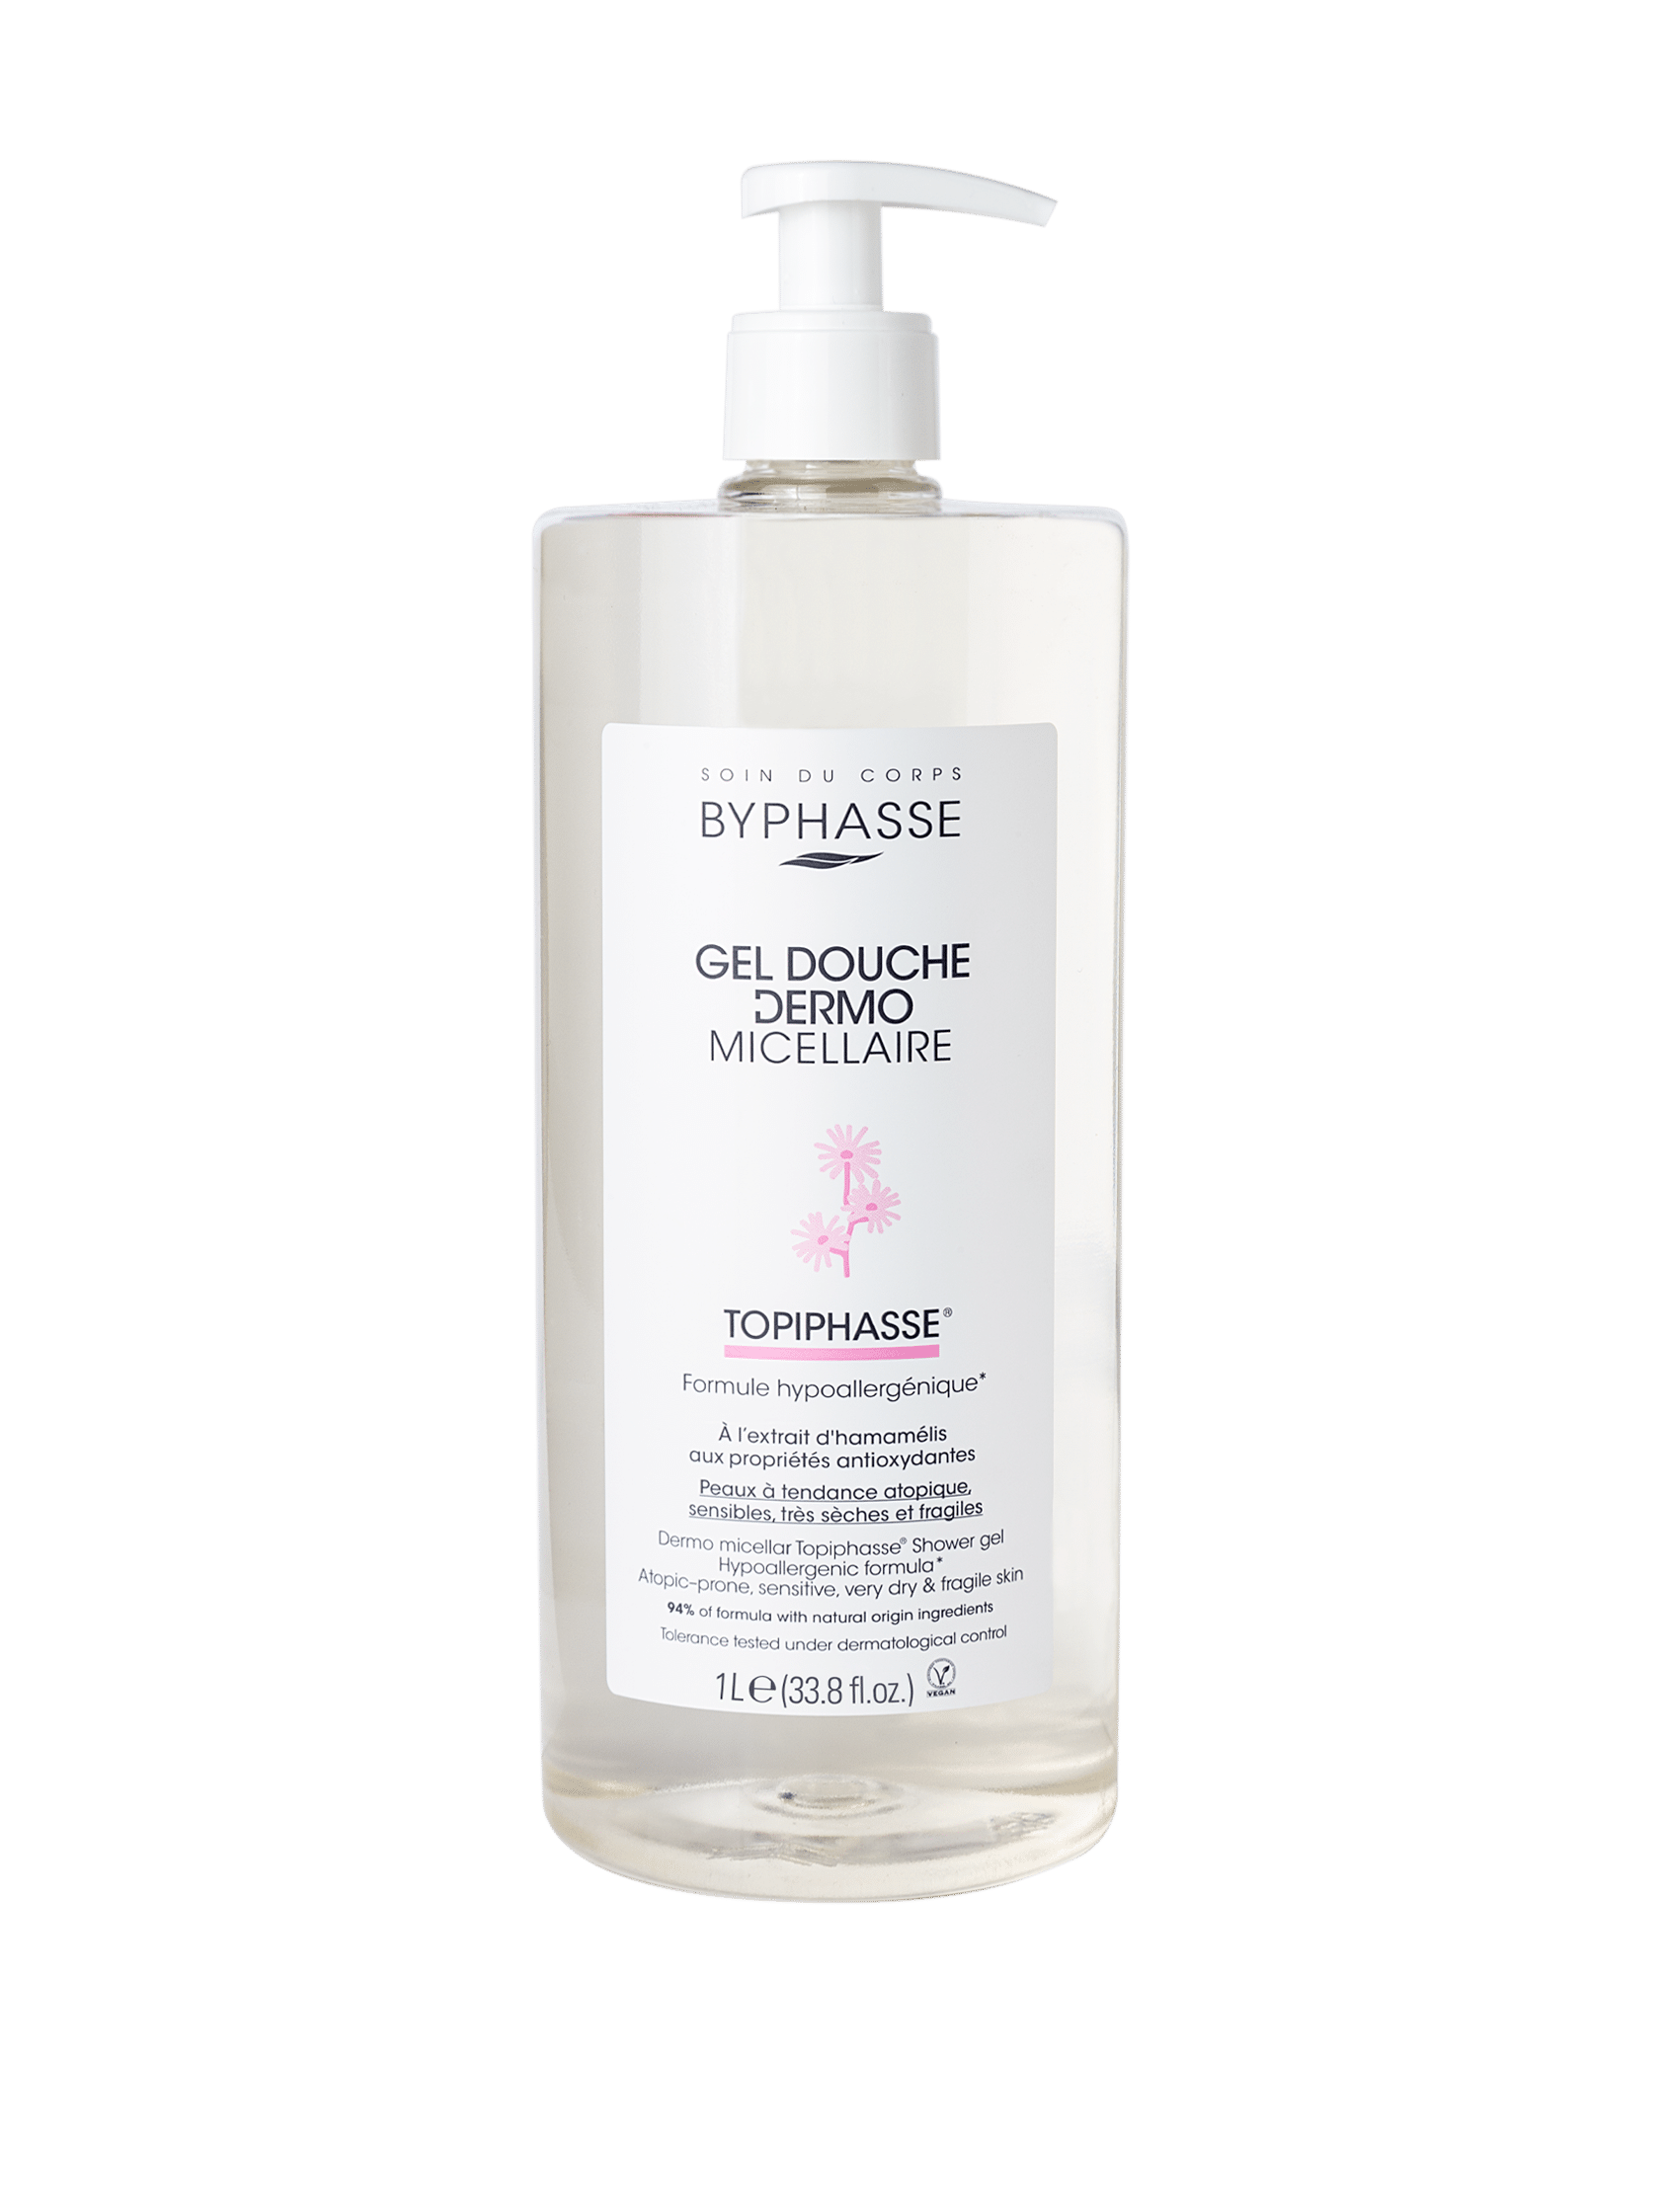 DERMO MICELLAR SHOWER GEL TOPIPHASSE 1L product_image